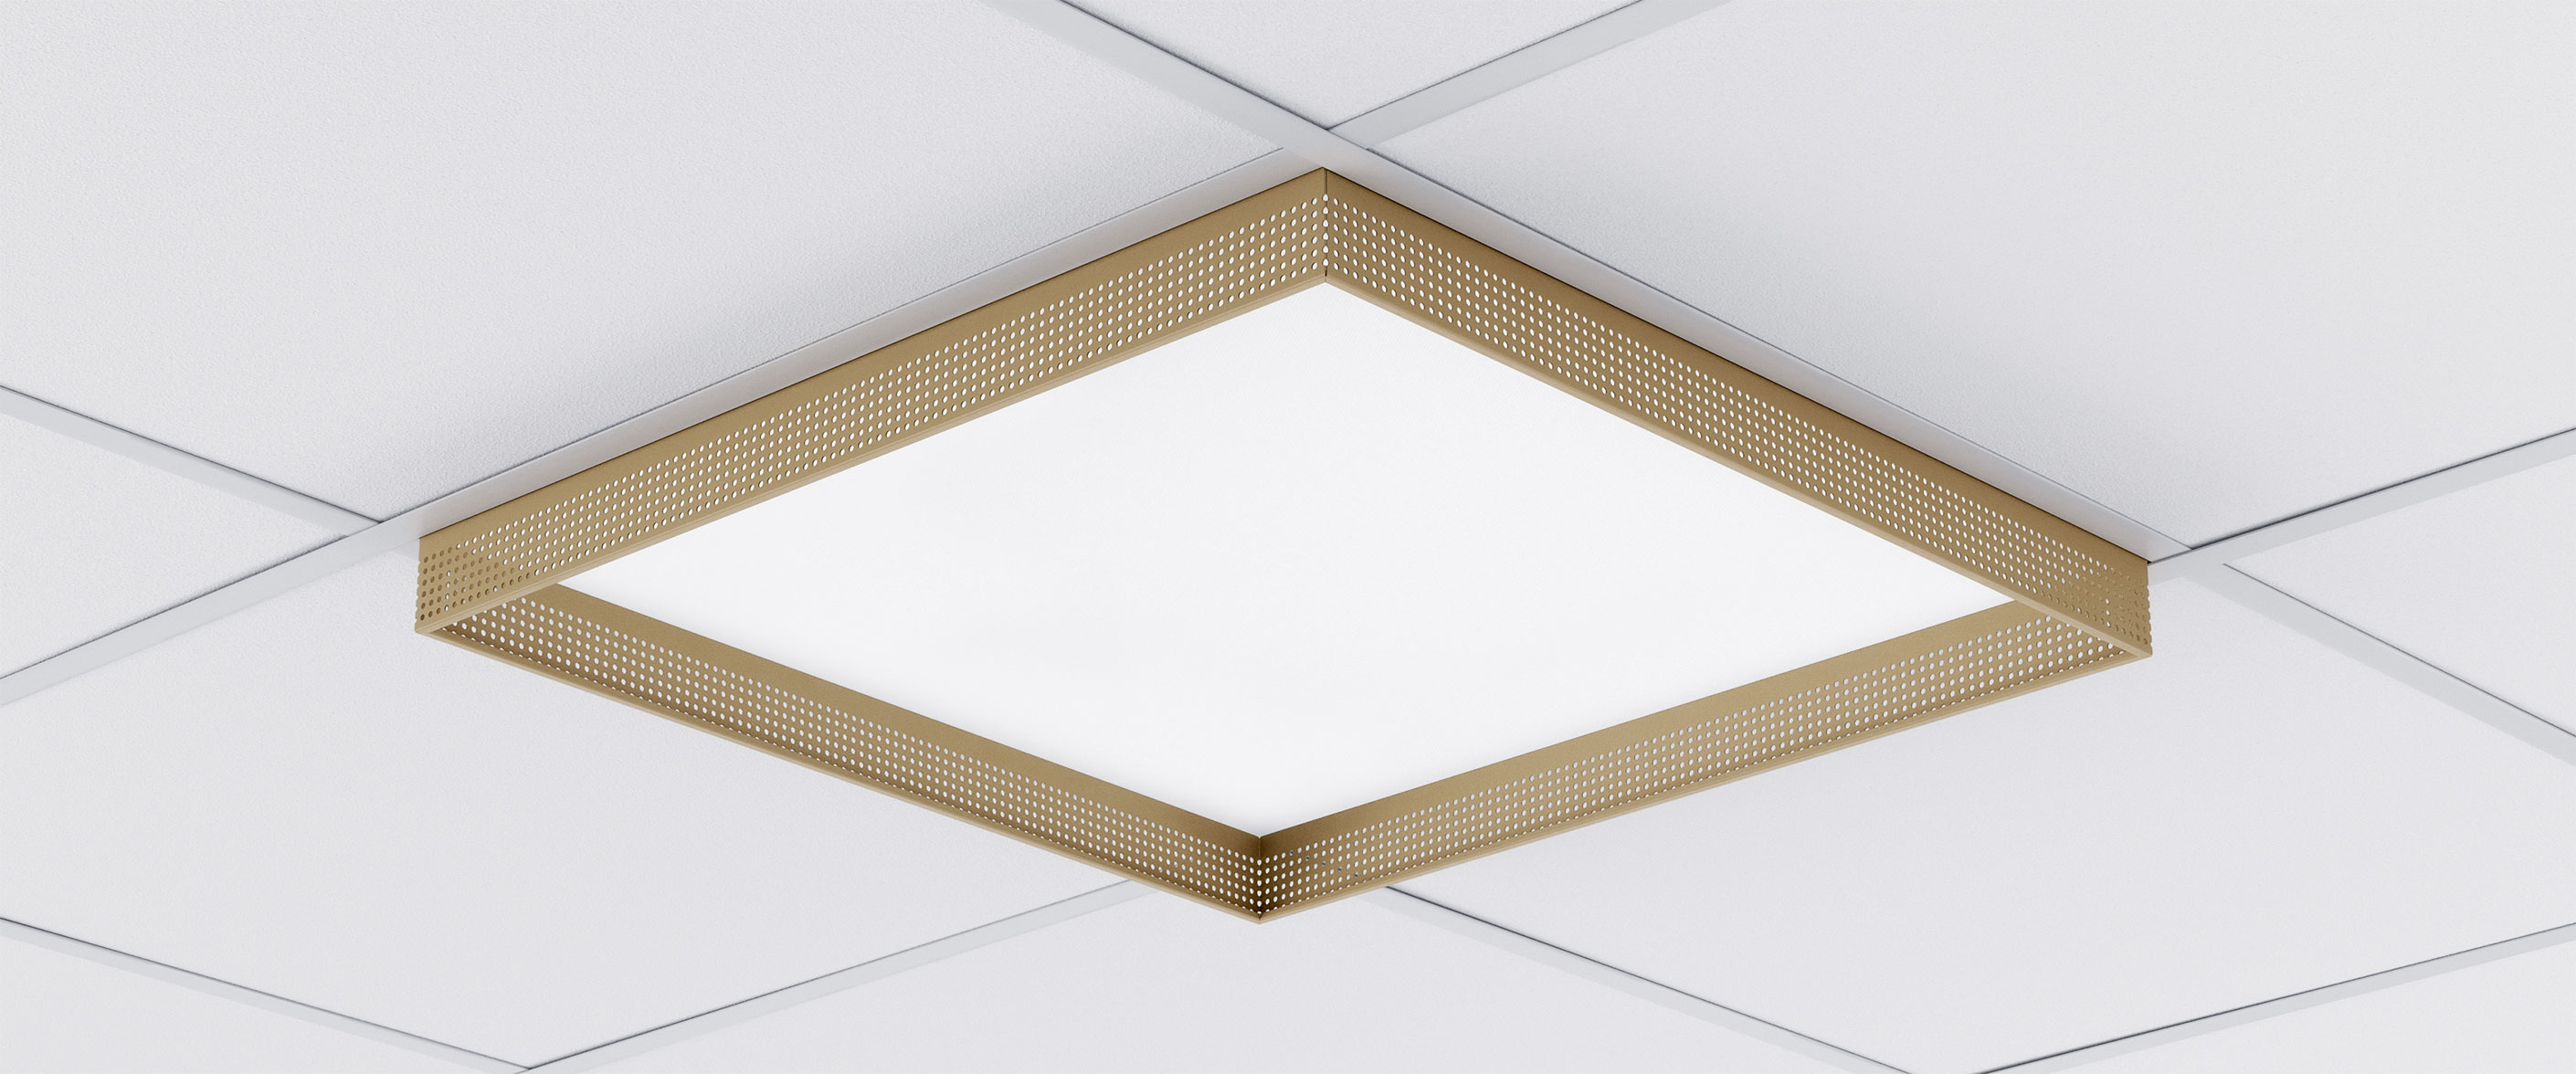 Fence - decorative accessory for recessed 600x600 luminaires. See more versions under Accessories.